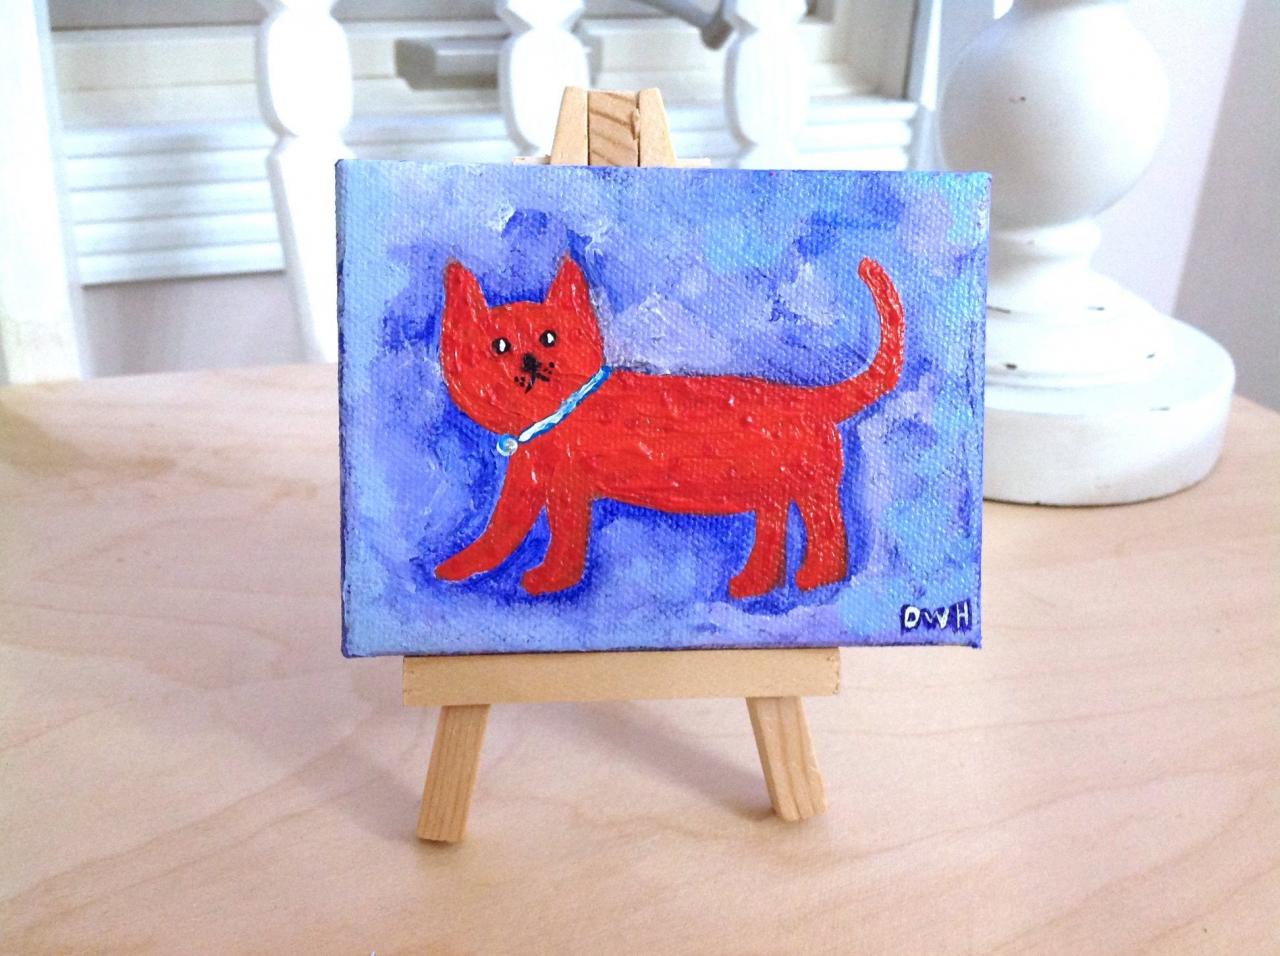 Small Canvas Painting Of A Cat /tiny Art/original Art/miniature Art/collectable Art/folk Style Art/home Decor/cat Art/gift For Cat Lover/charming